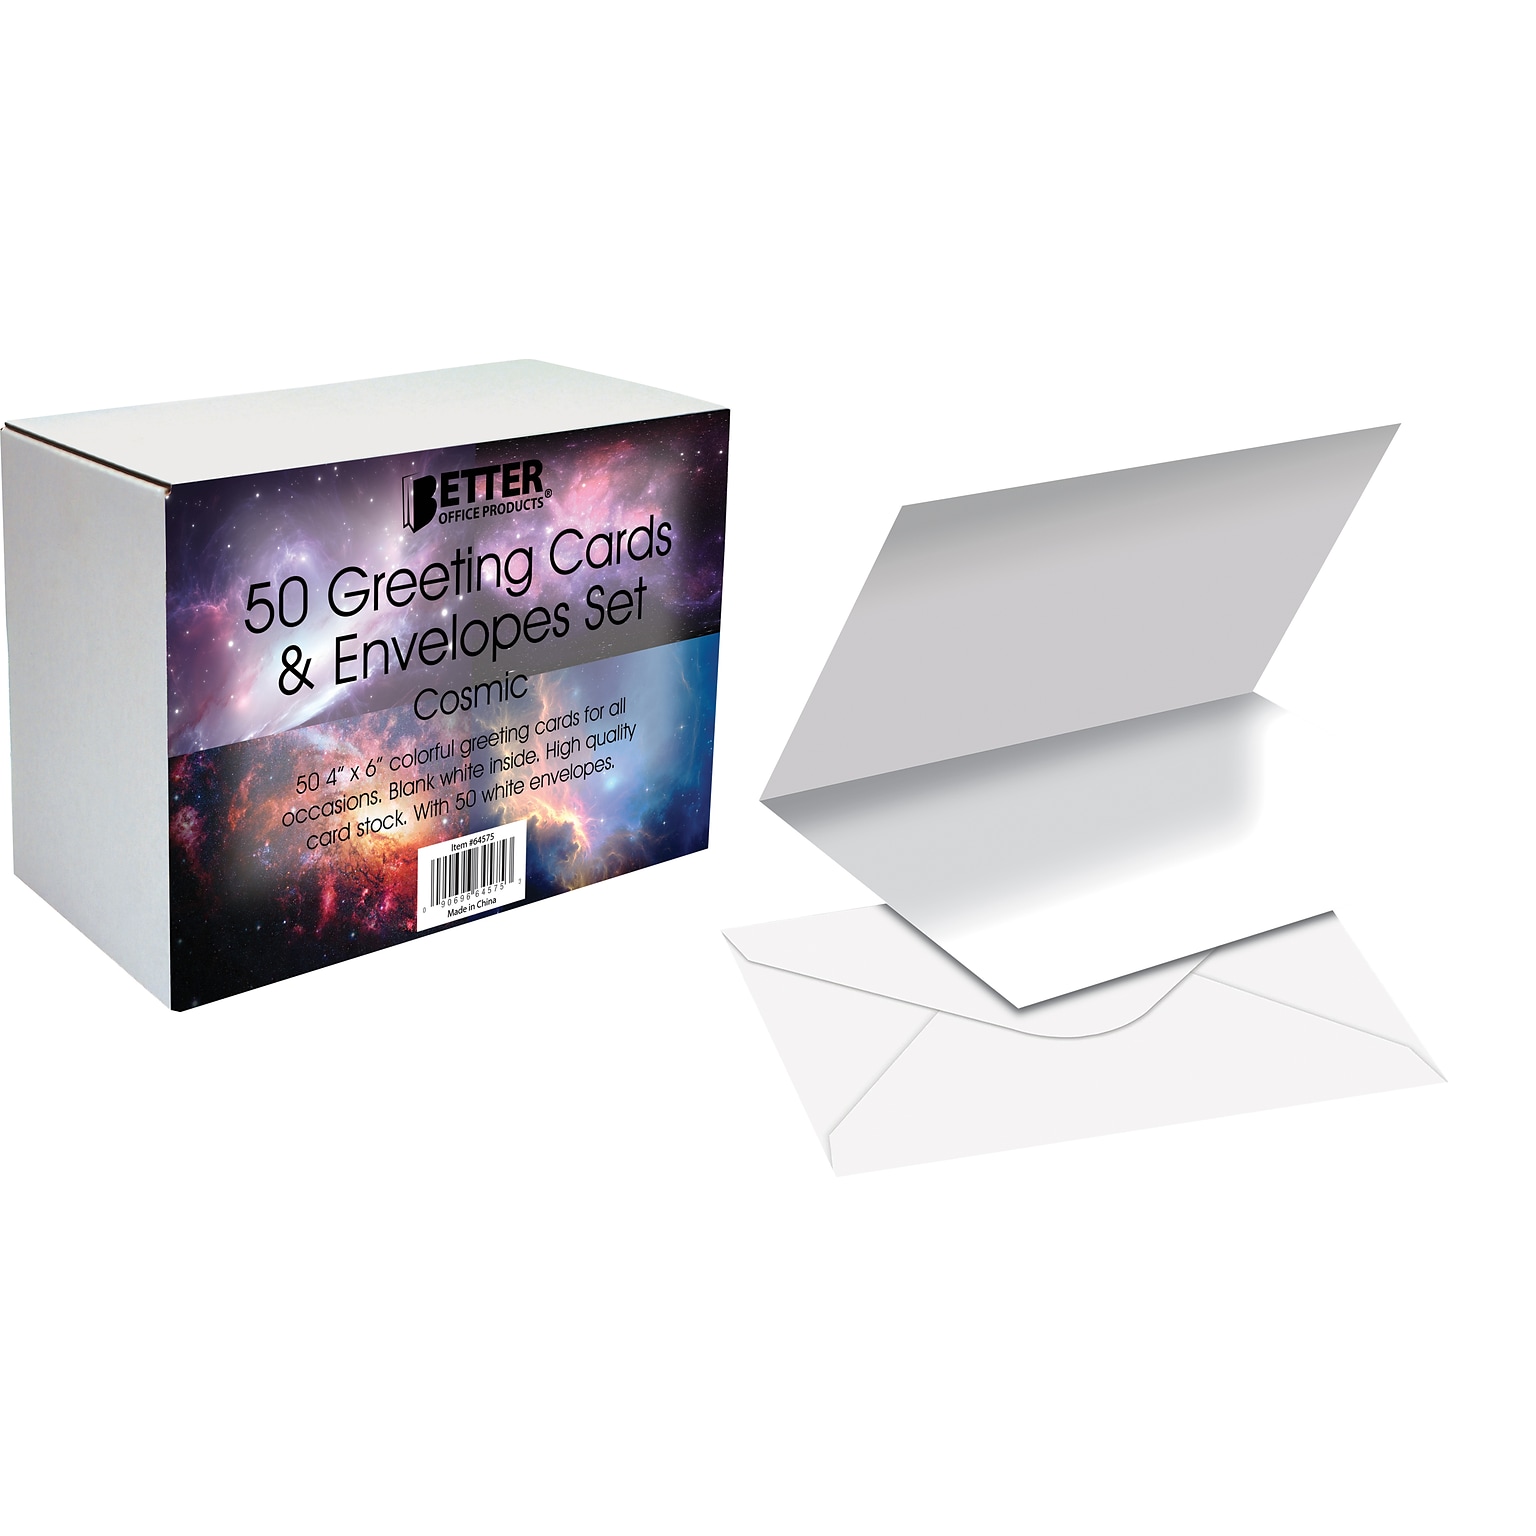 Better Office Cards with Envelopes, 4 x 6, Cosmic, 50/Pack (64575-50PK)